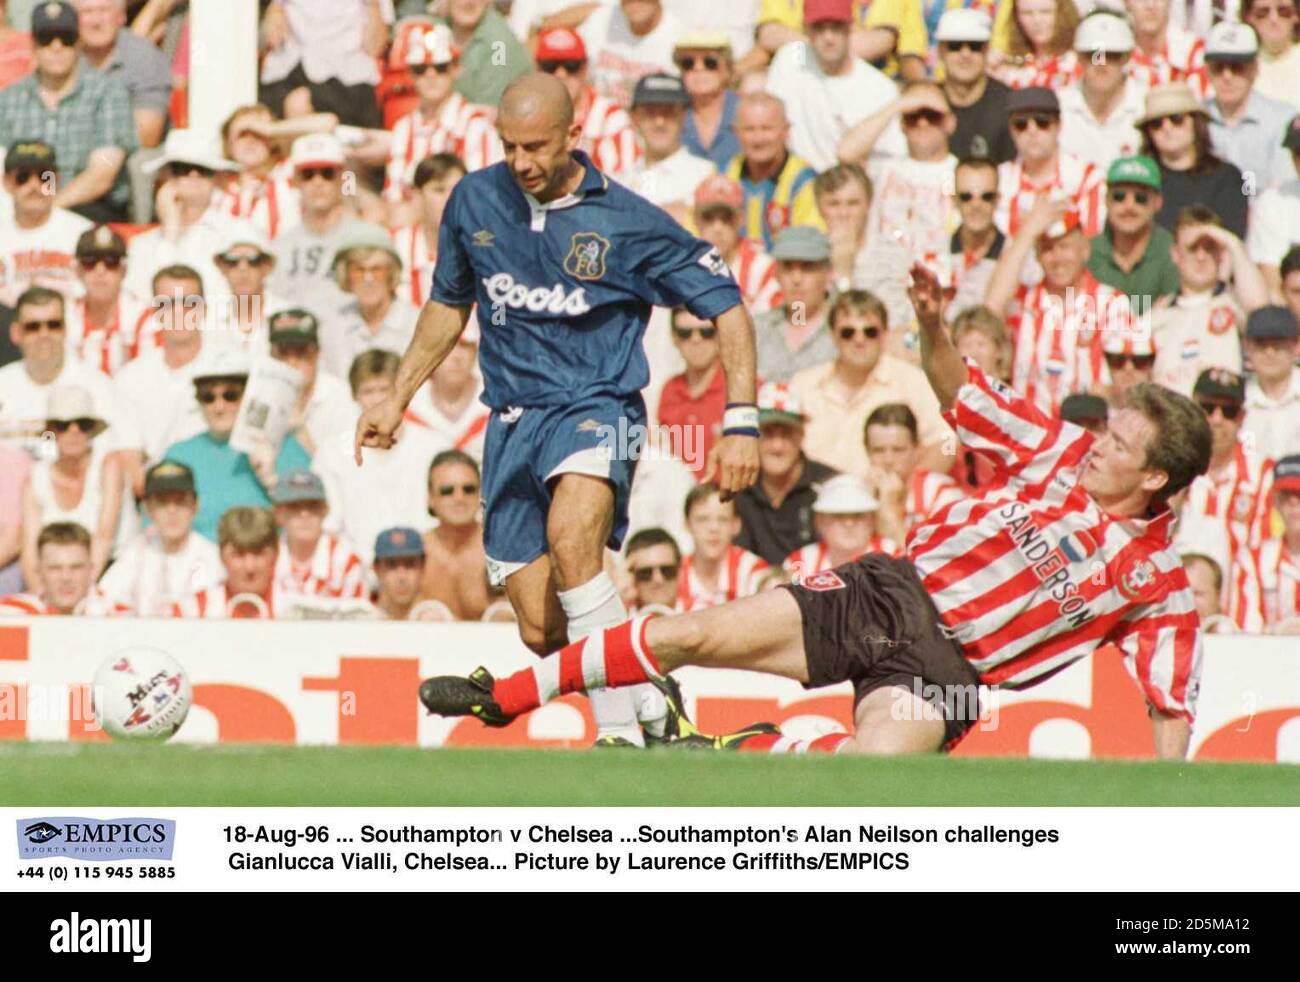 18-Aug-96 ... Southampton v Chelsea ...Southampton's Alan Neilson challenges Gianluca Vialli, Chelsea.  Picture by Laurence Griffiths/EMPICS Stock Photo